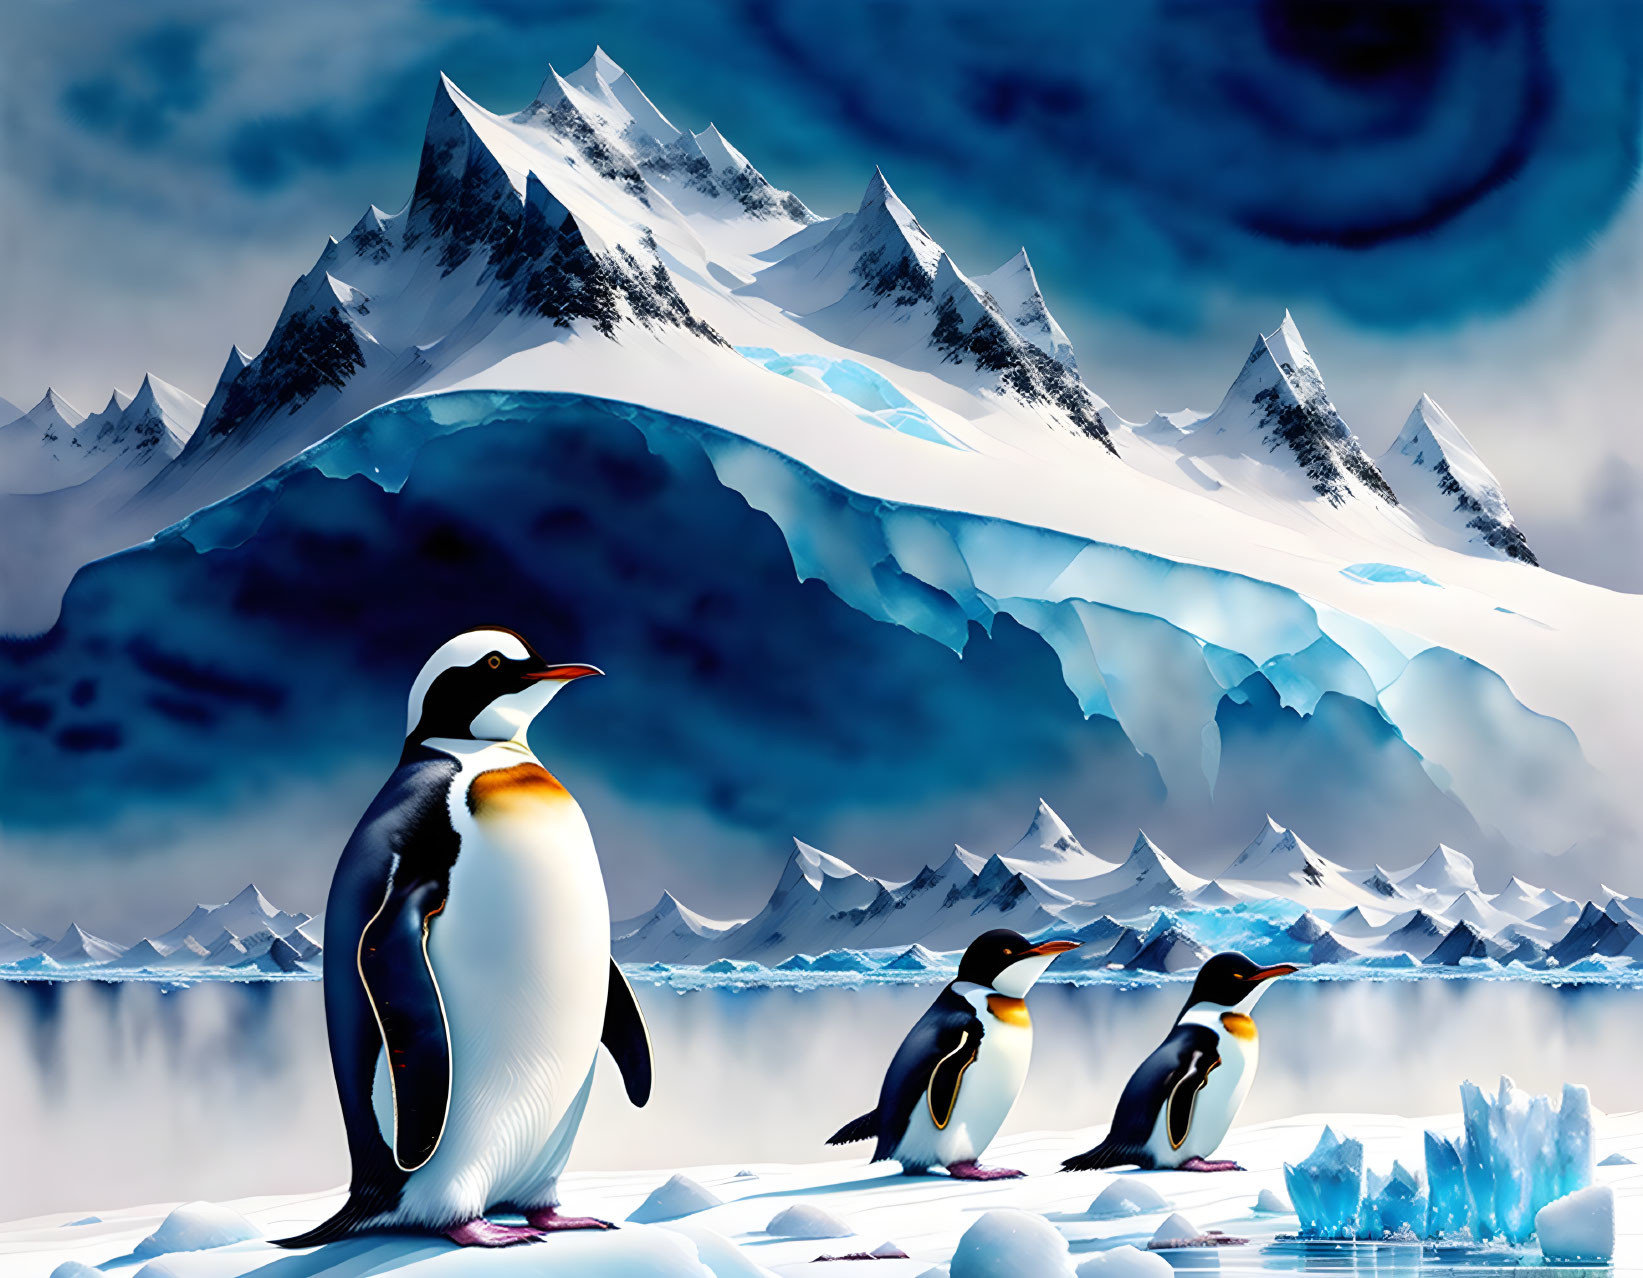 Penguins in snowy landscape with mountains under blue sky